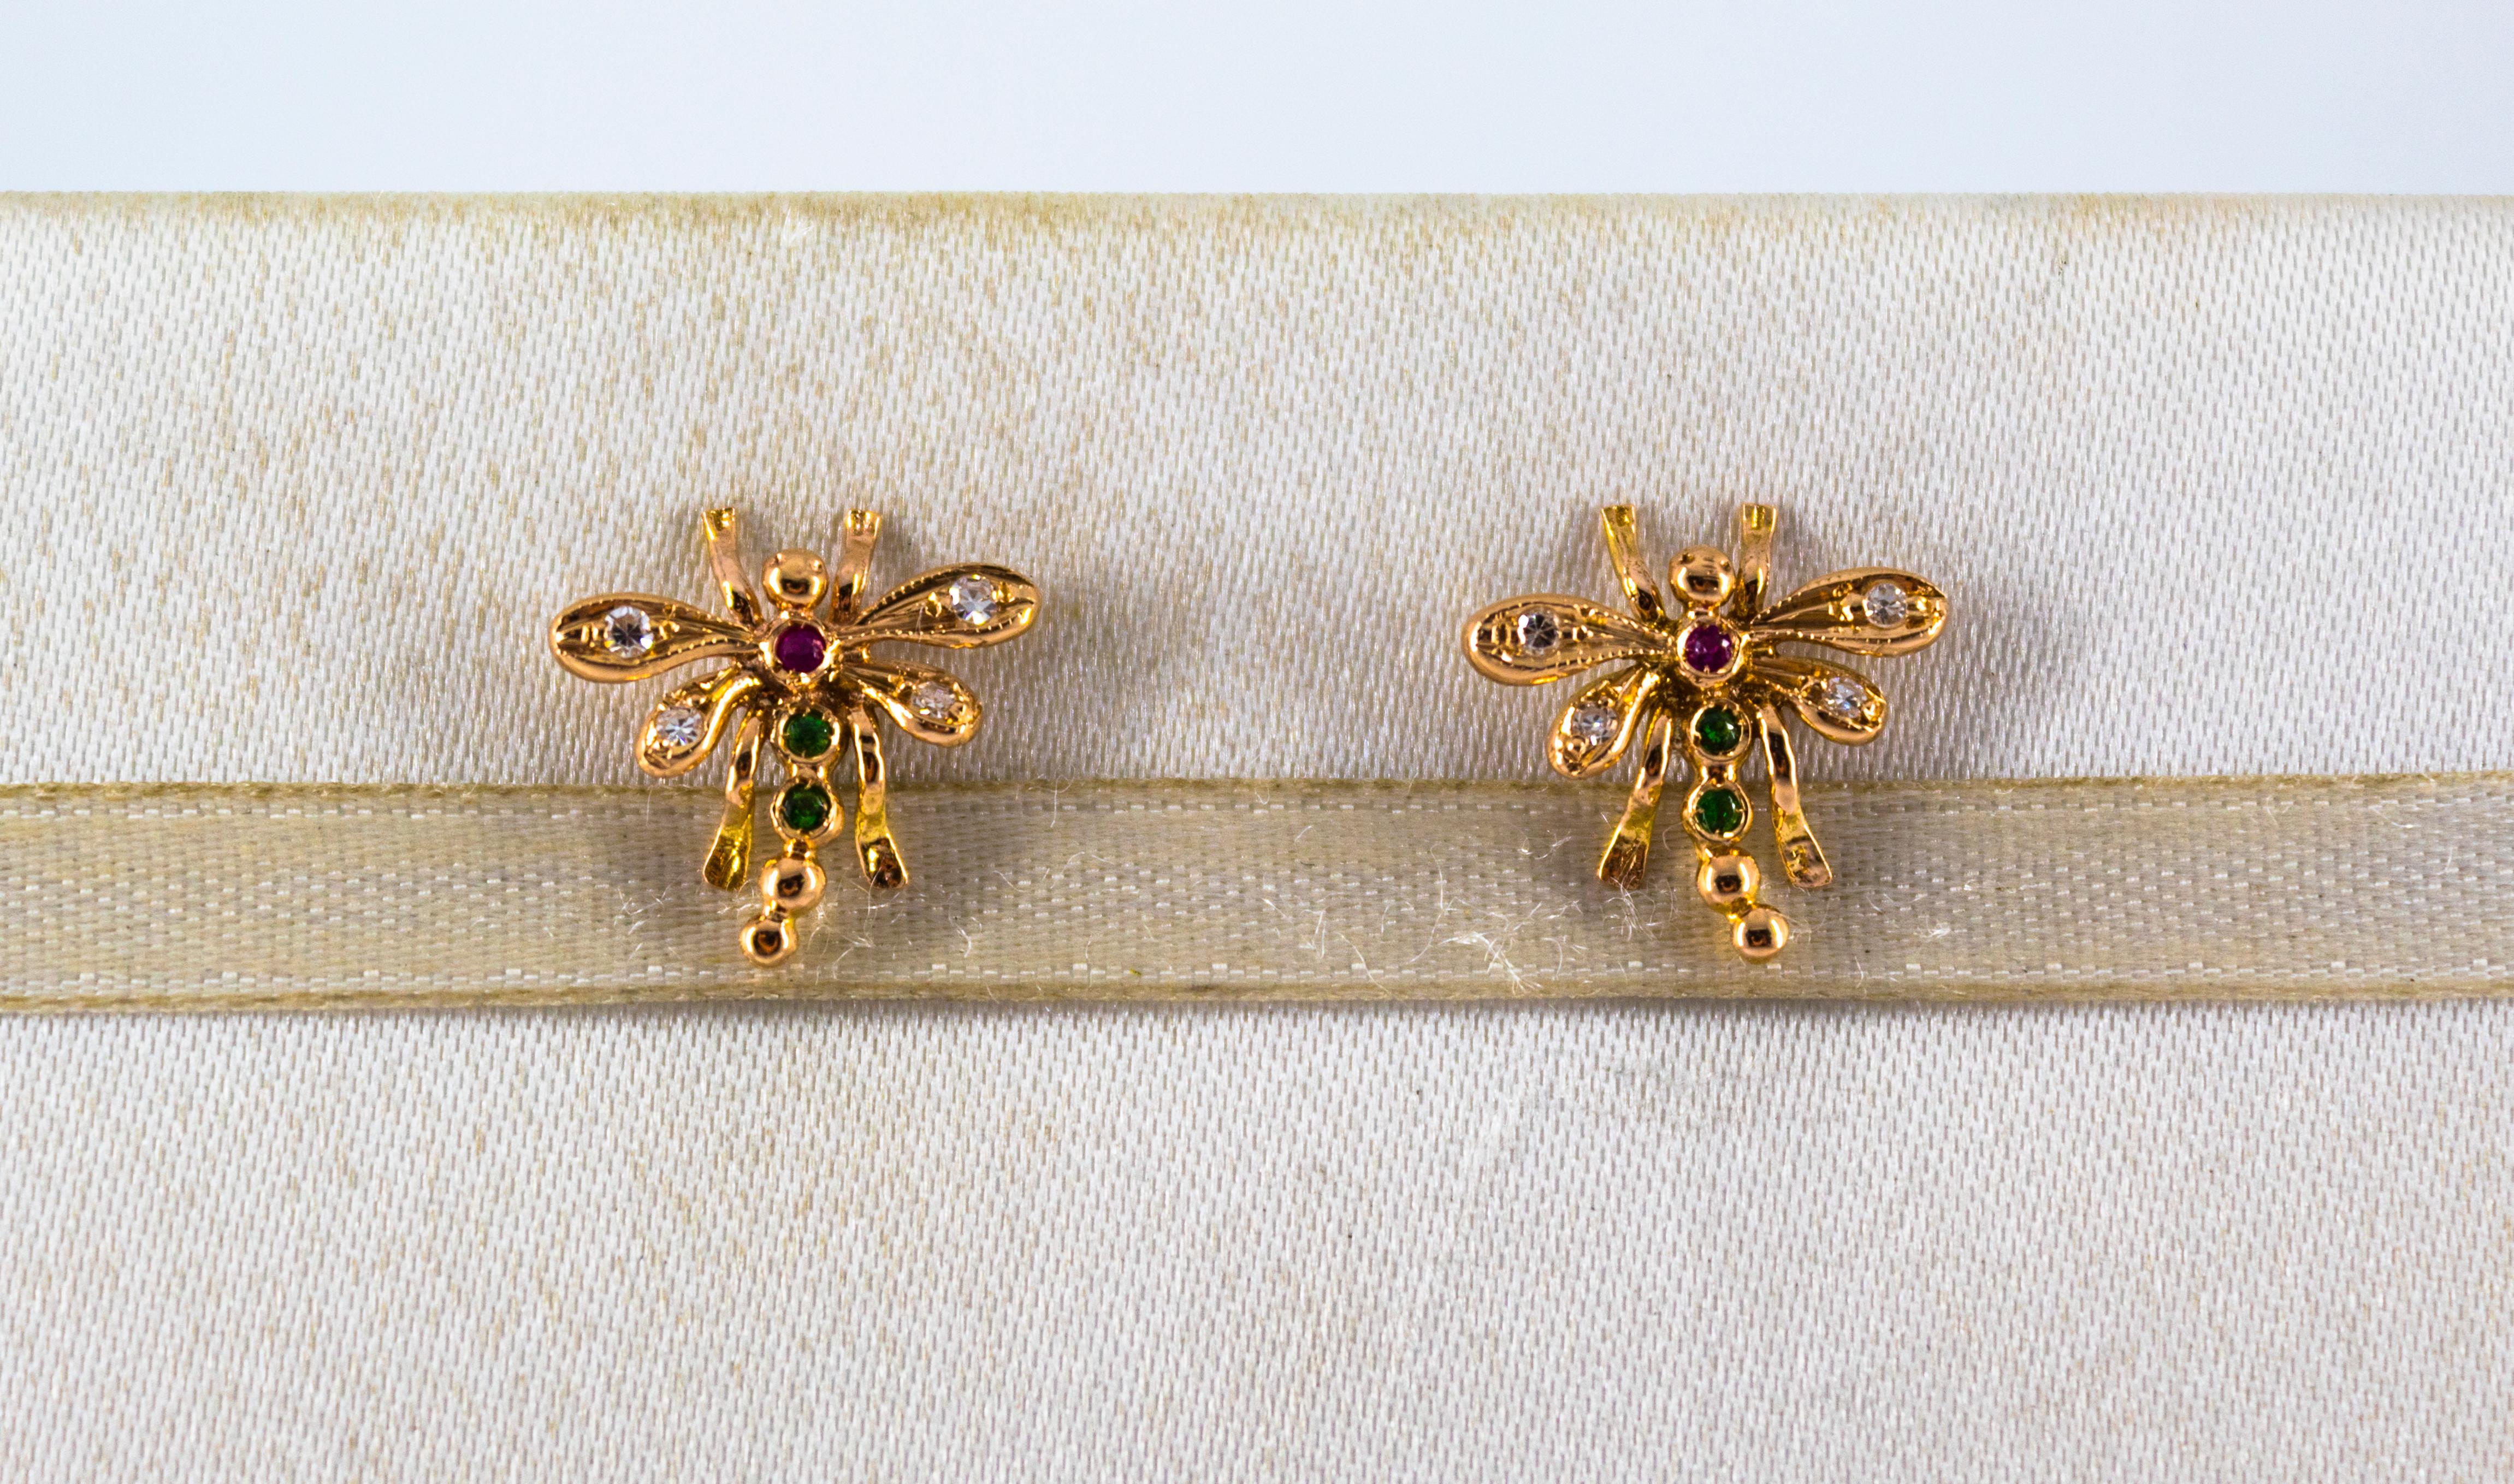 These Stud Earrings are made of 14K Yellow Gold.
These Earrings have 0.08 Carats of White Diamonds.
These Earrings have 0.04 Carats of Emeralds.
These Earrings have 0.02 Carats of Rubies.
These Earrings are available also with Blue Sapphires.
All